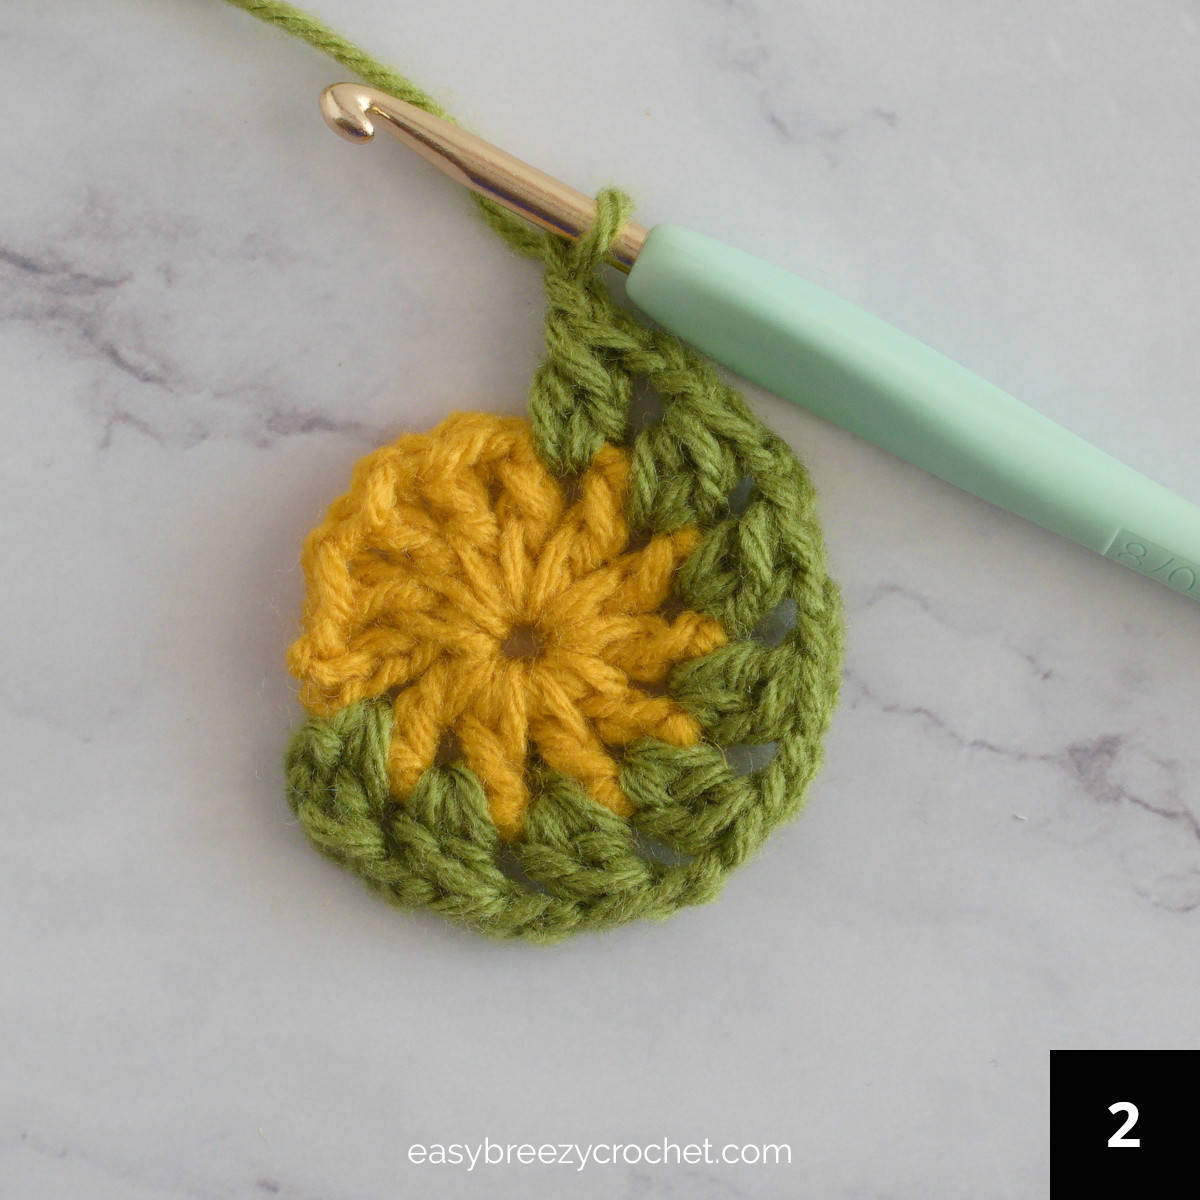 An amber and olive green crocheted circle.